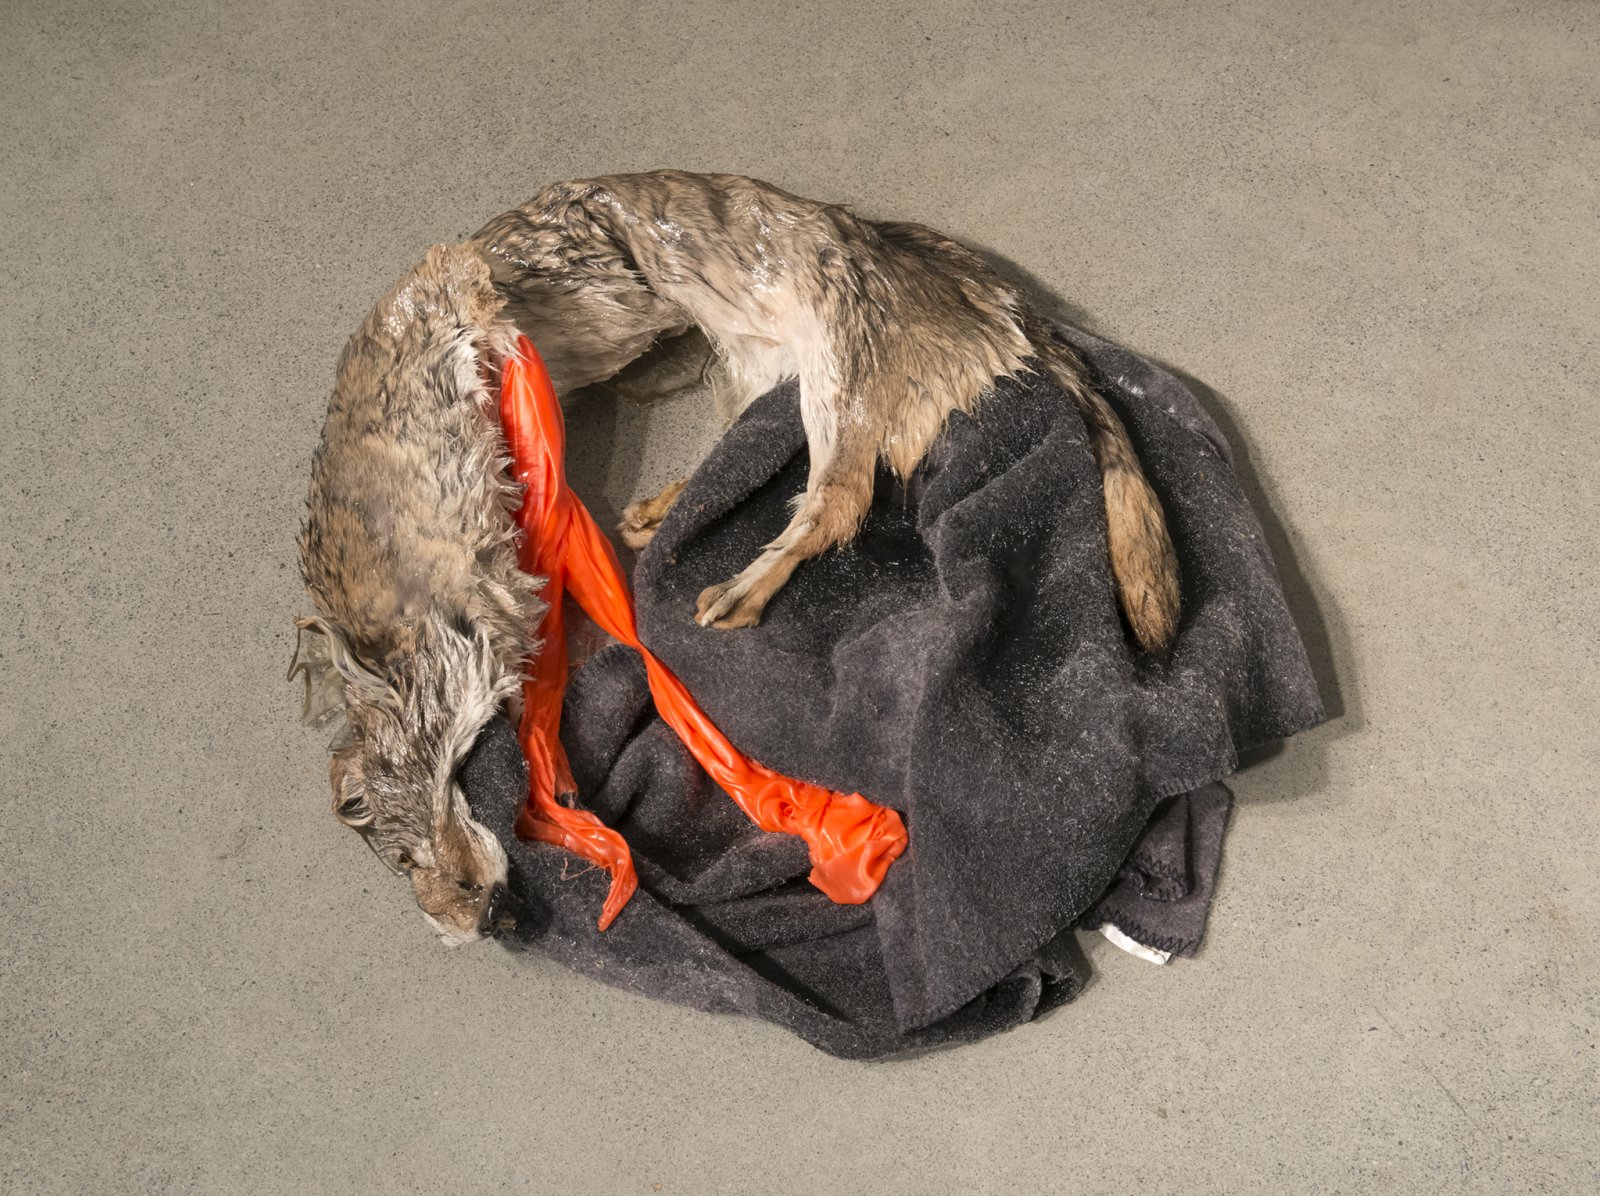 Duane Linklater, Torpor (detail), 2016, coyote fur, wool blanket, polyester cloth, resin, found picture, shoelace, brick, dimensions variable